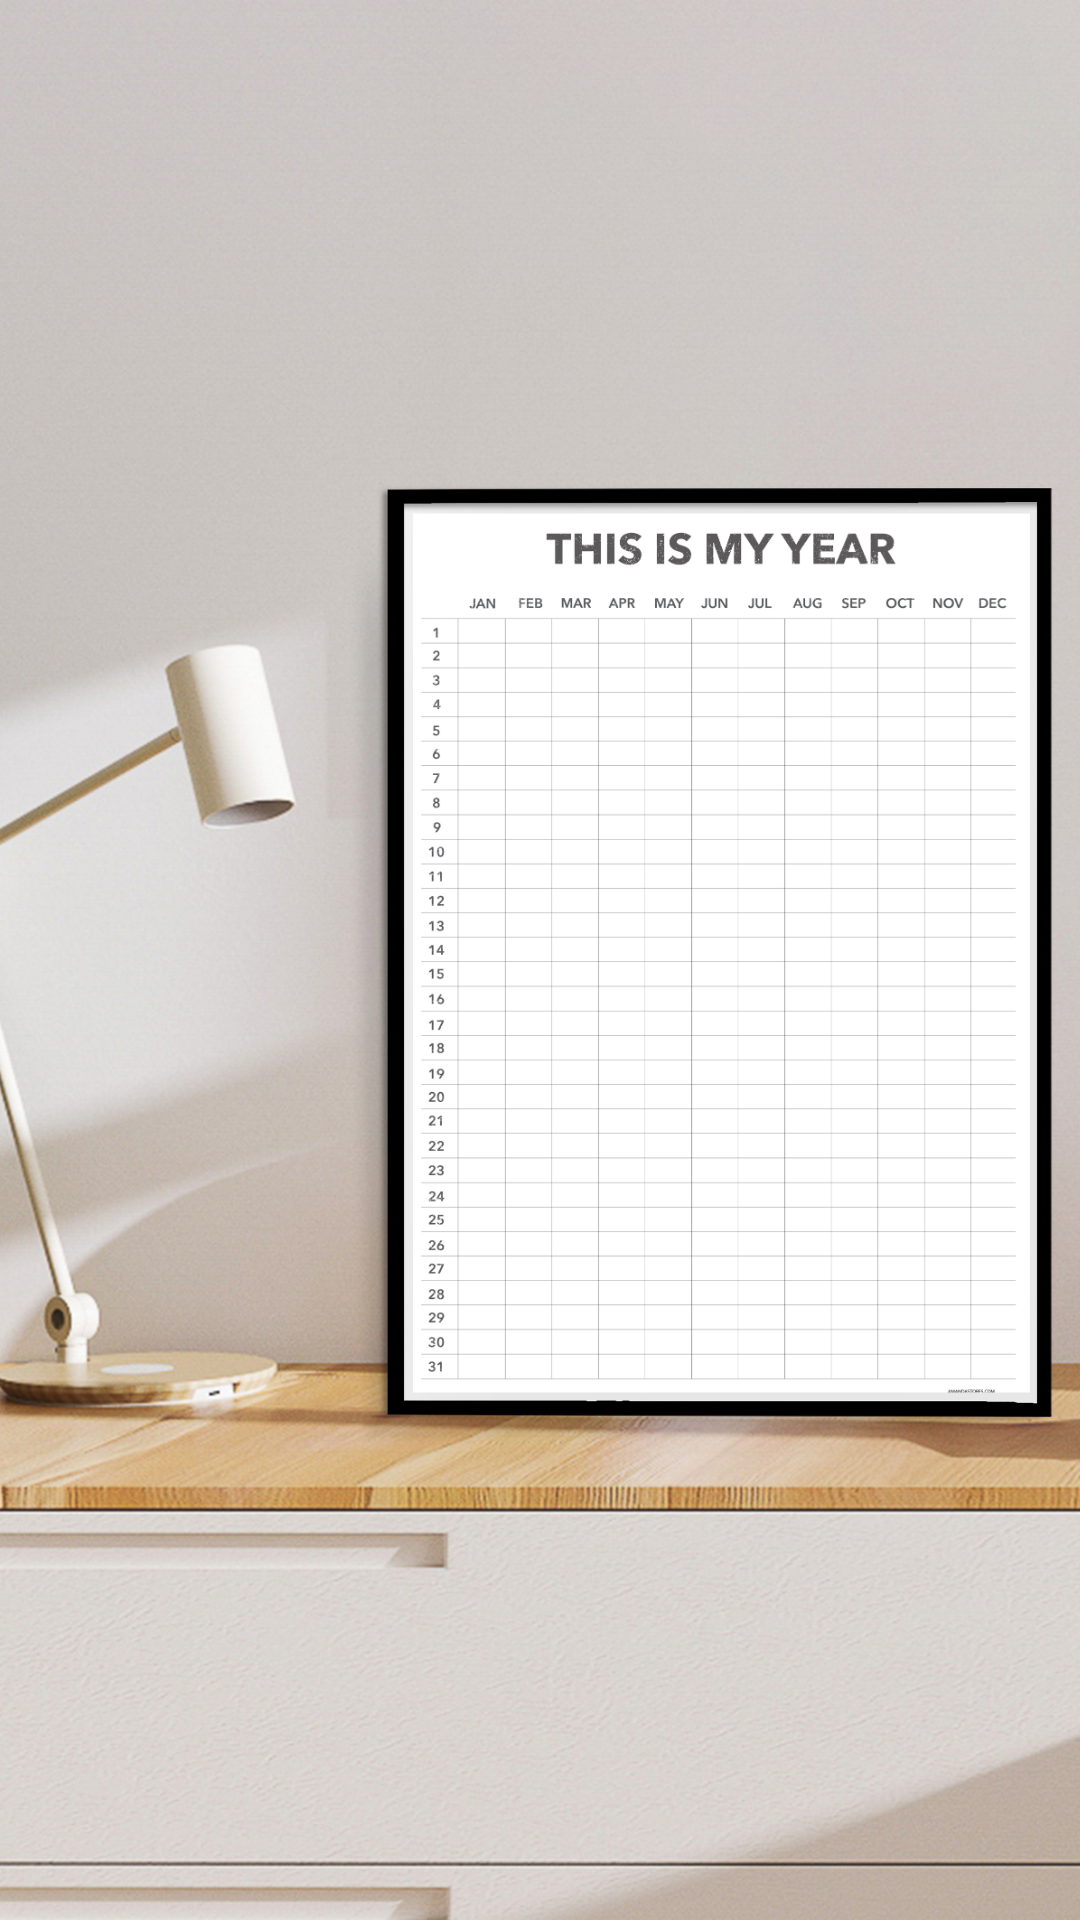 This is My Year - Reusable Forever Wall Calendar - 24" x 36"- PHYSICAL COPY